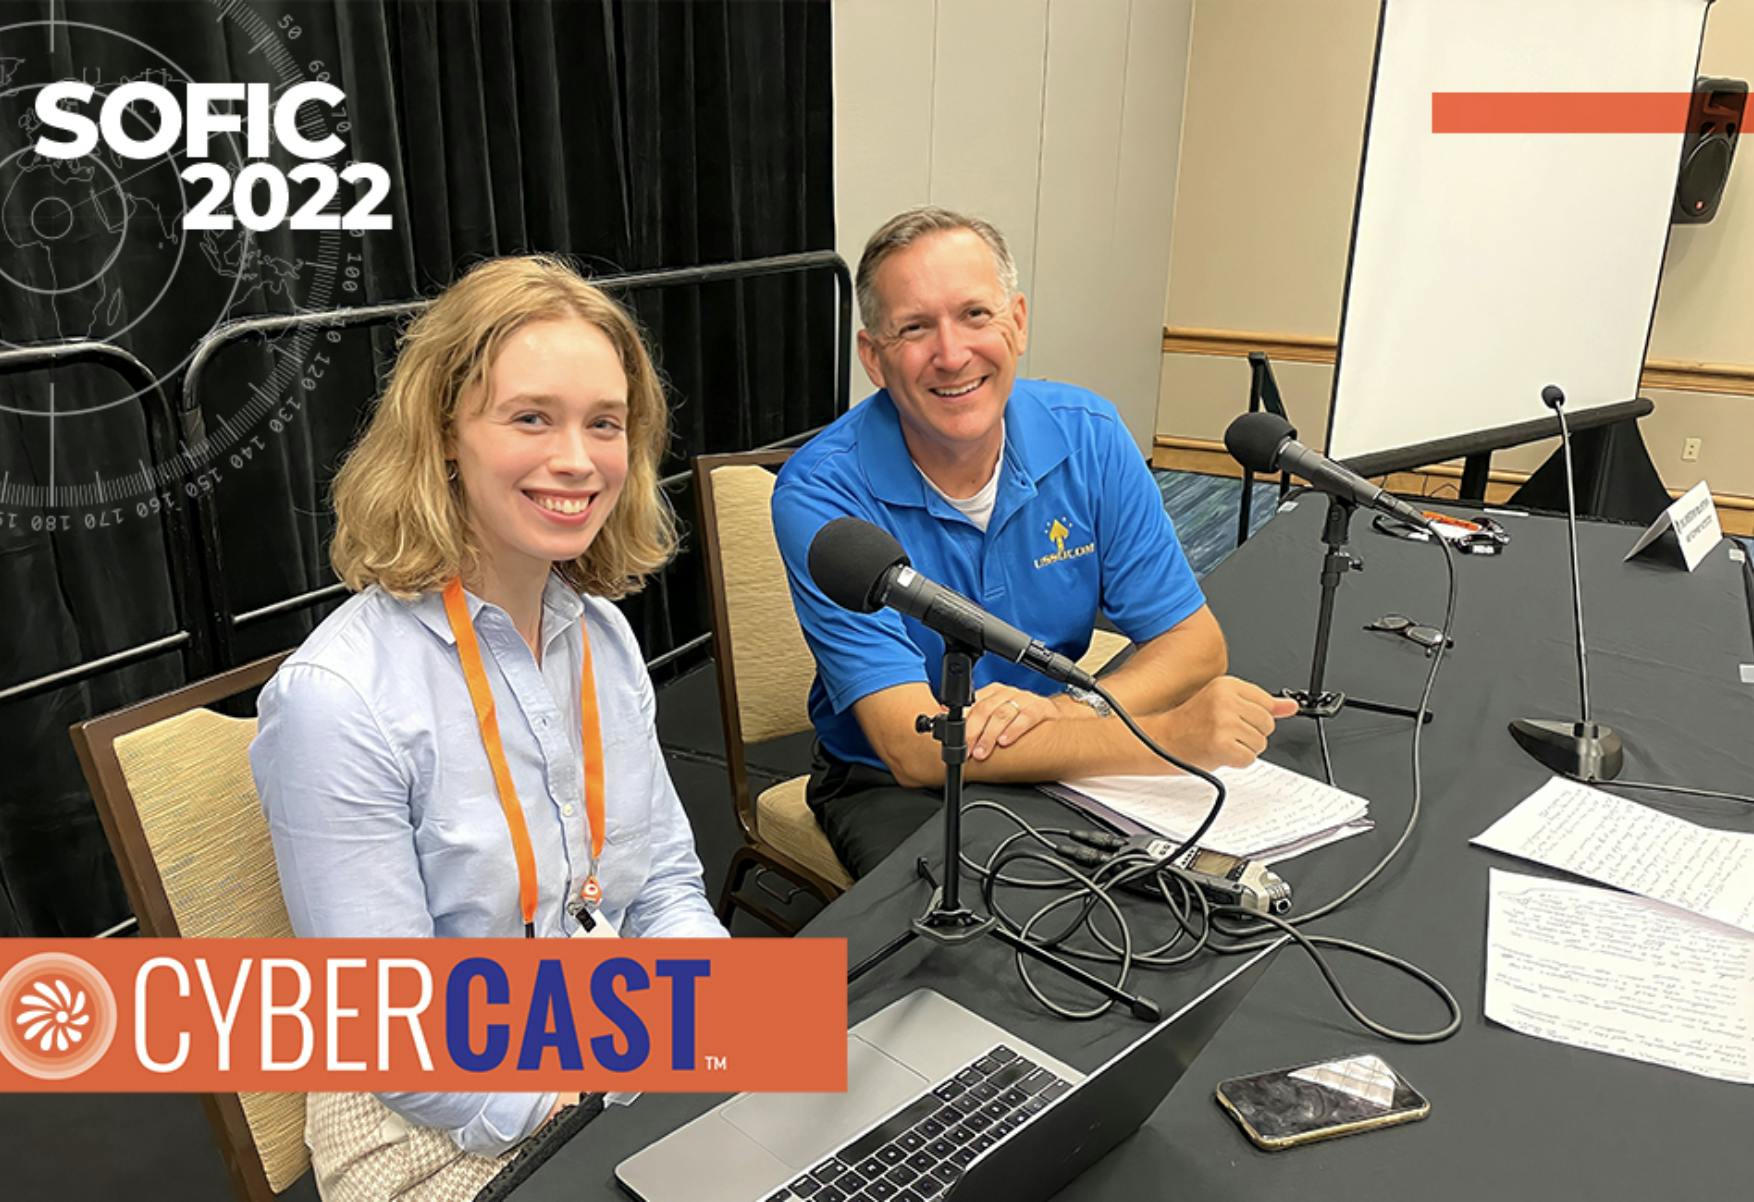 Image of Cybercast host Kate Macri and Col. Joe Pishock, COO, Networks and Services, USSOCOM at recording booth during SOFIC.